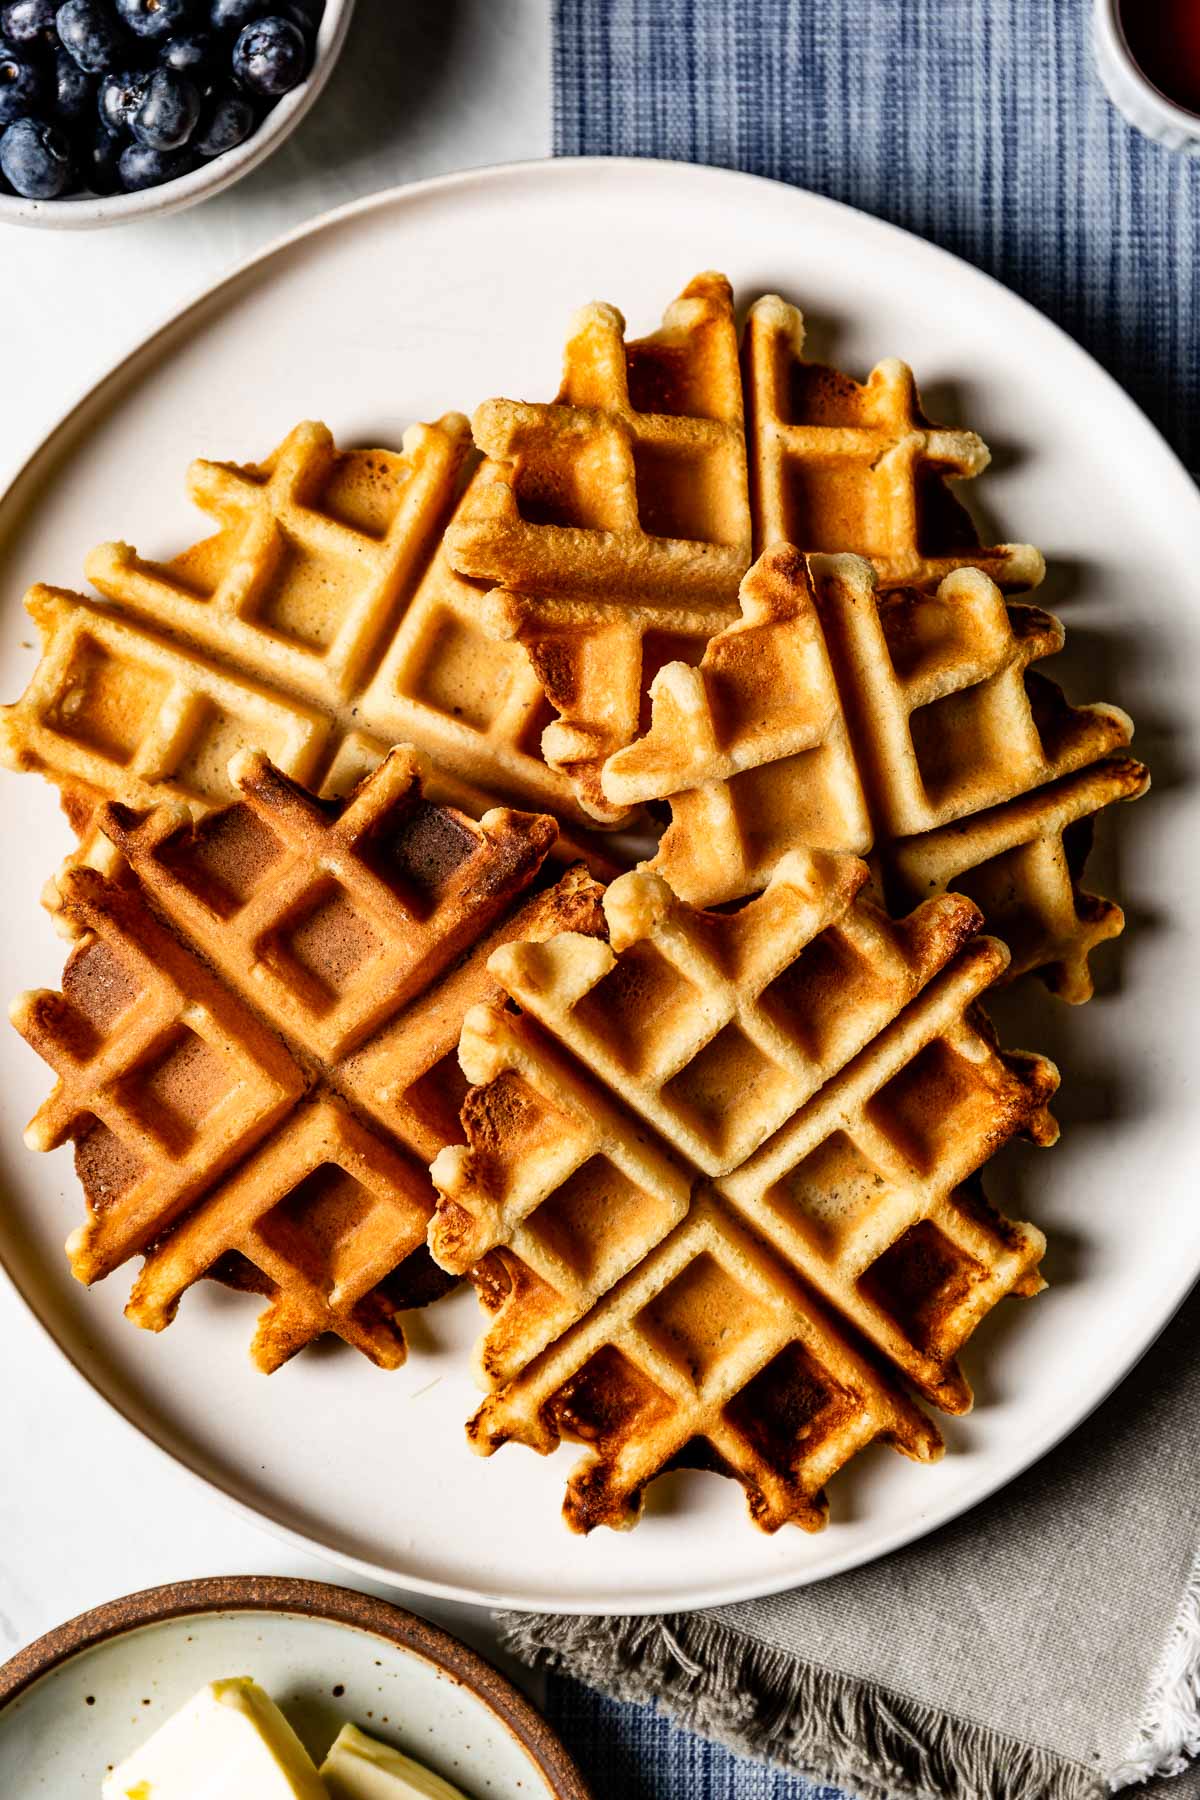 Almond flour waffles in a plate from the top view.